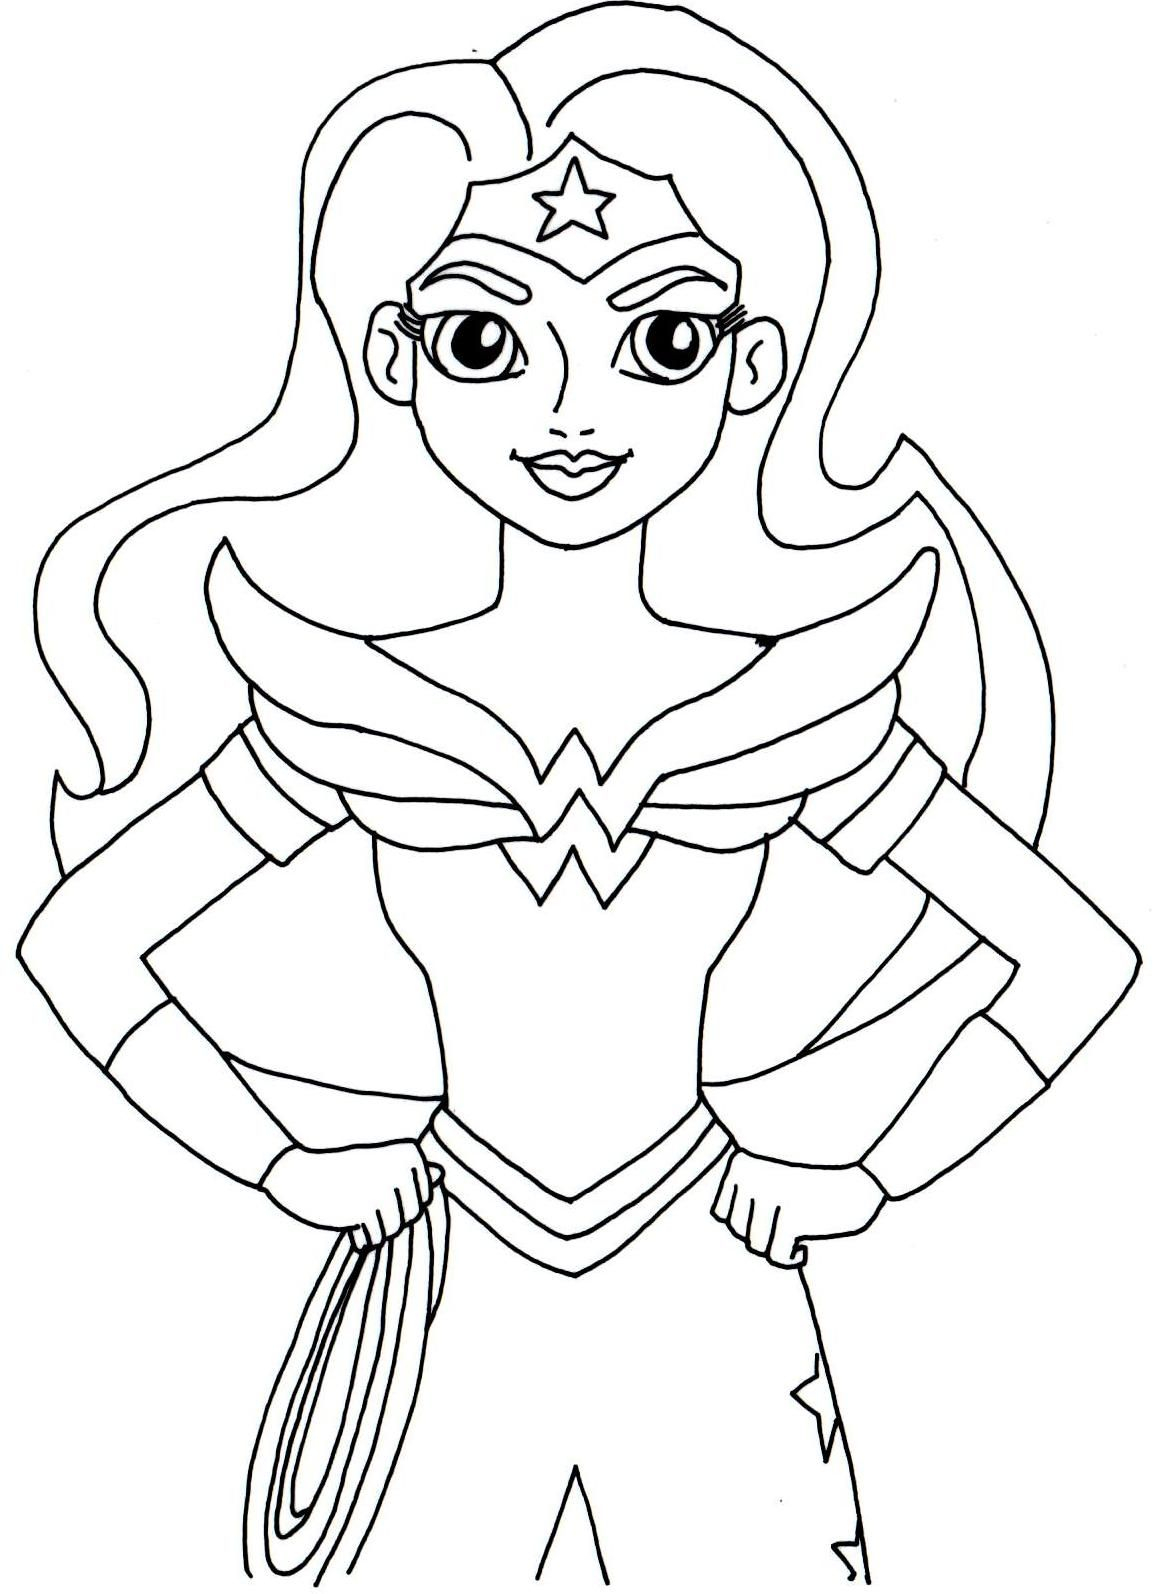 dc superhero girl coloring pages inspirational free printable super hero high coloring page for wonder woman more